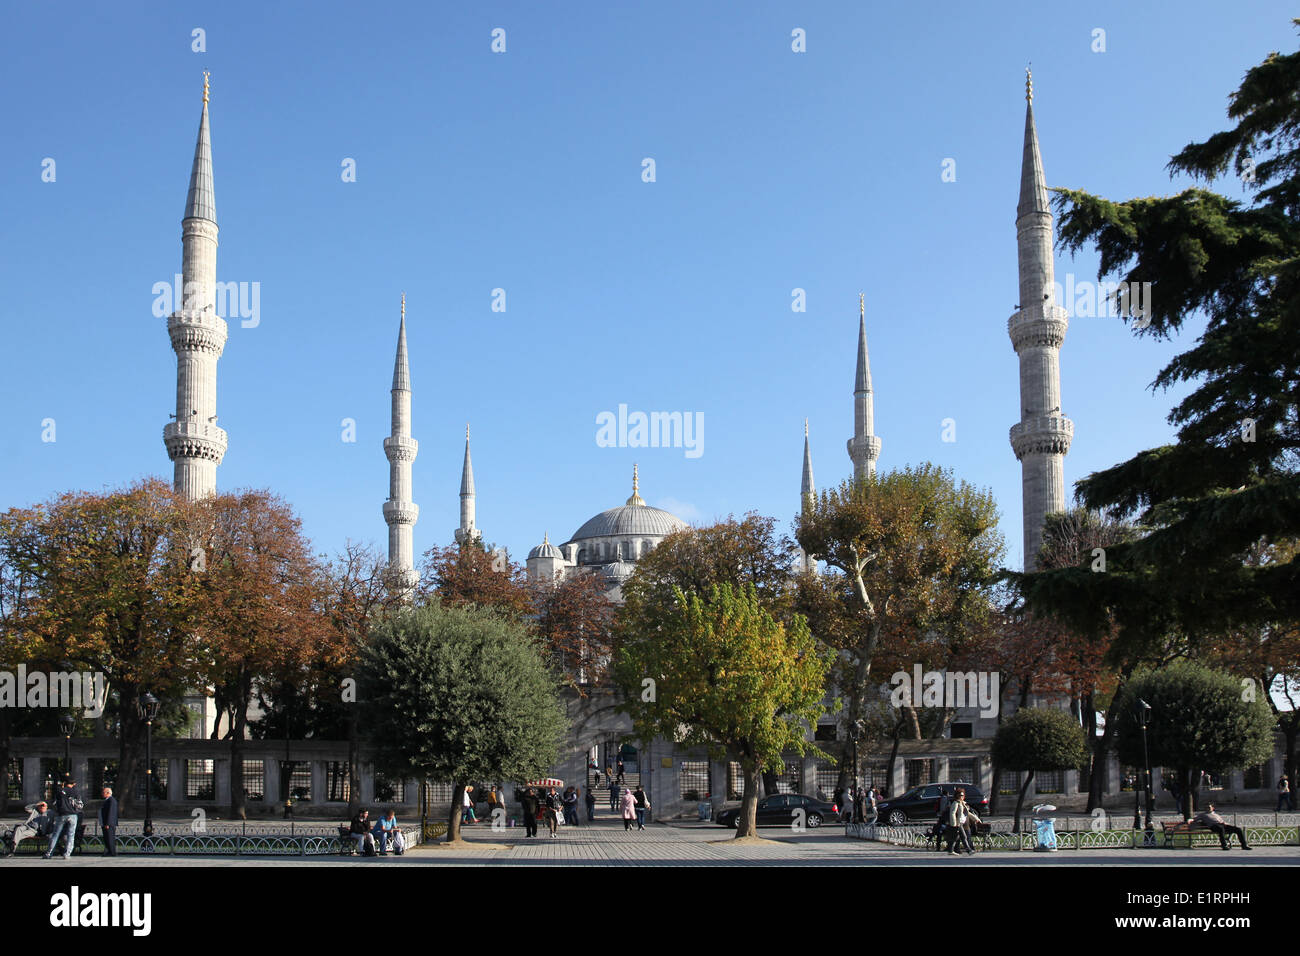 Sultan Ahmed Mosque, also called the blue mosque, in Istanbul, Turkey Stock Photo